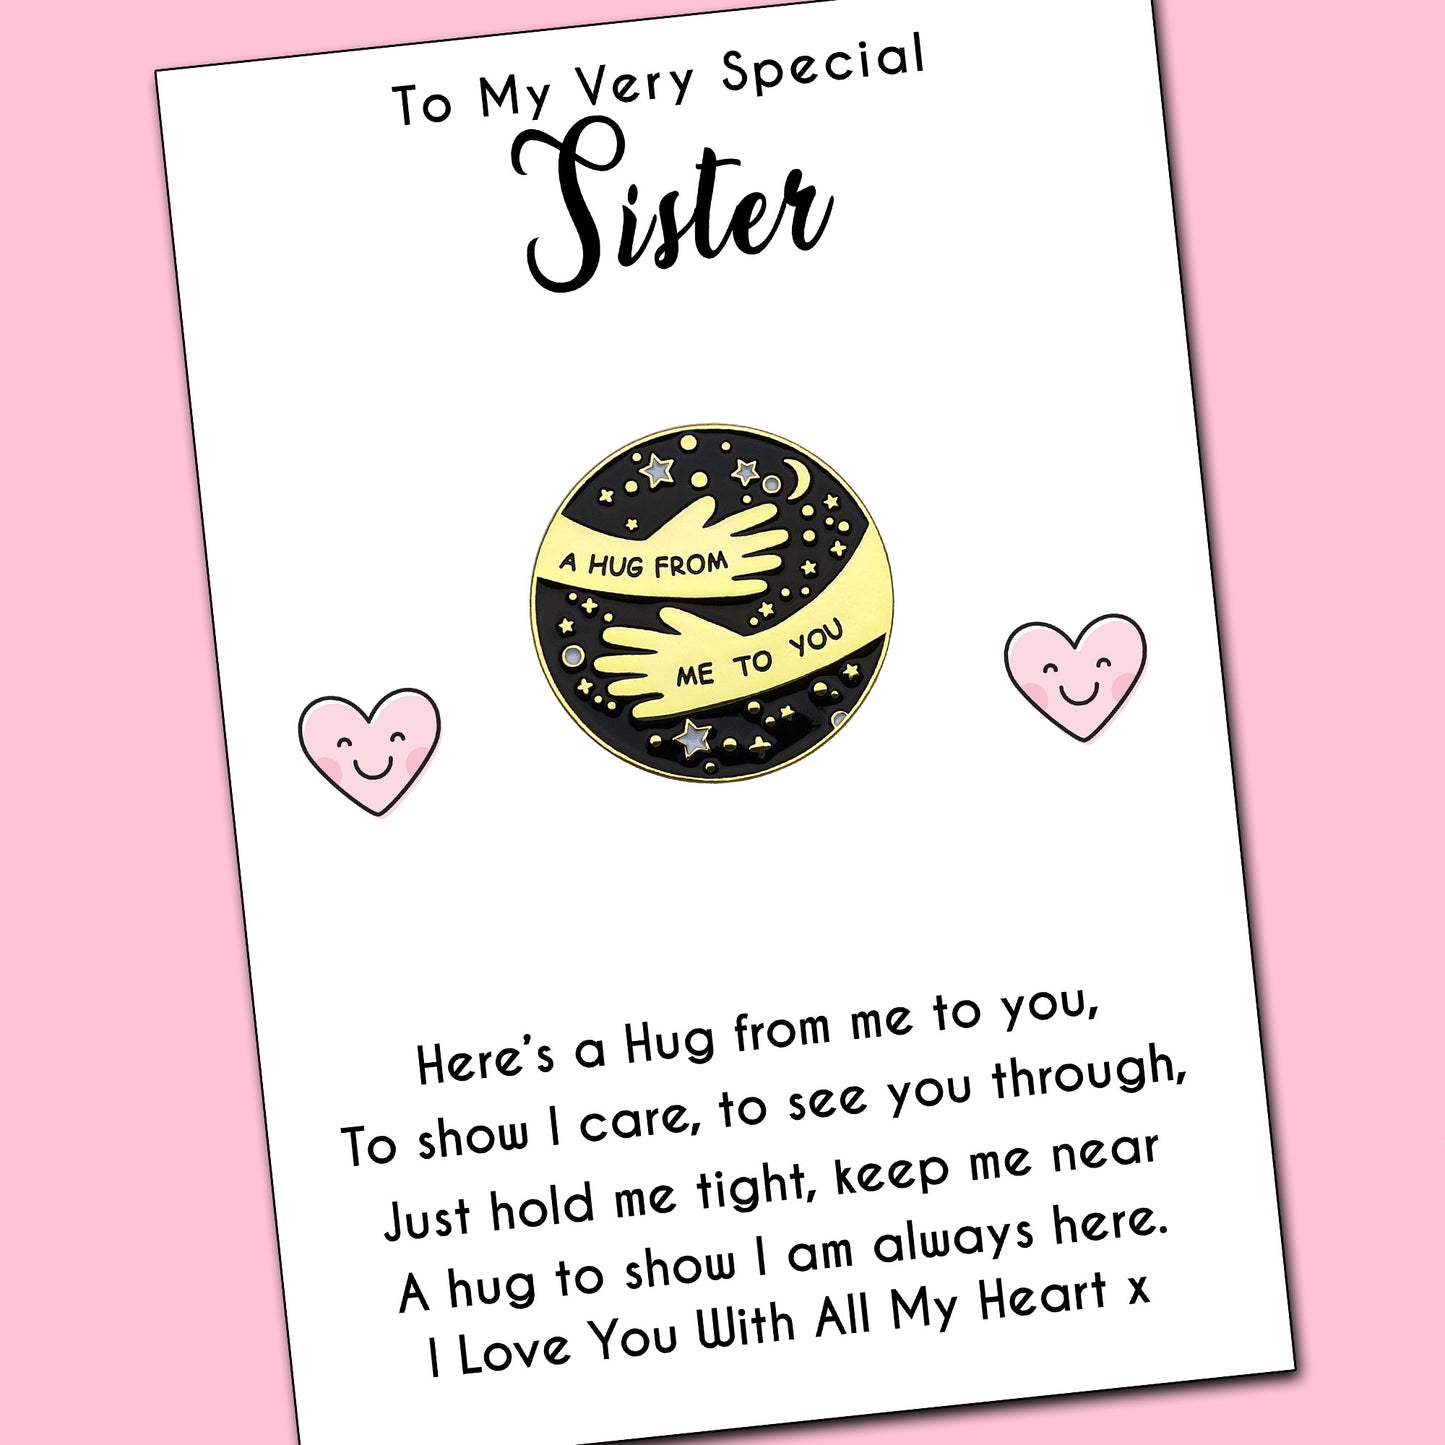 Very Special Sister Pocket Hug Pin Badges & Personalised Message Card